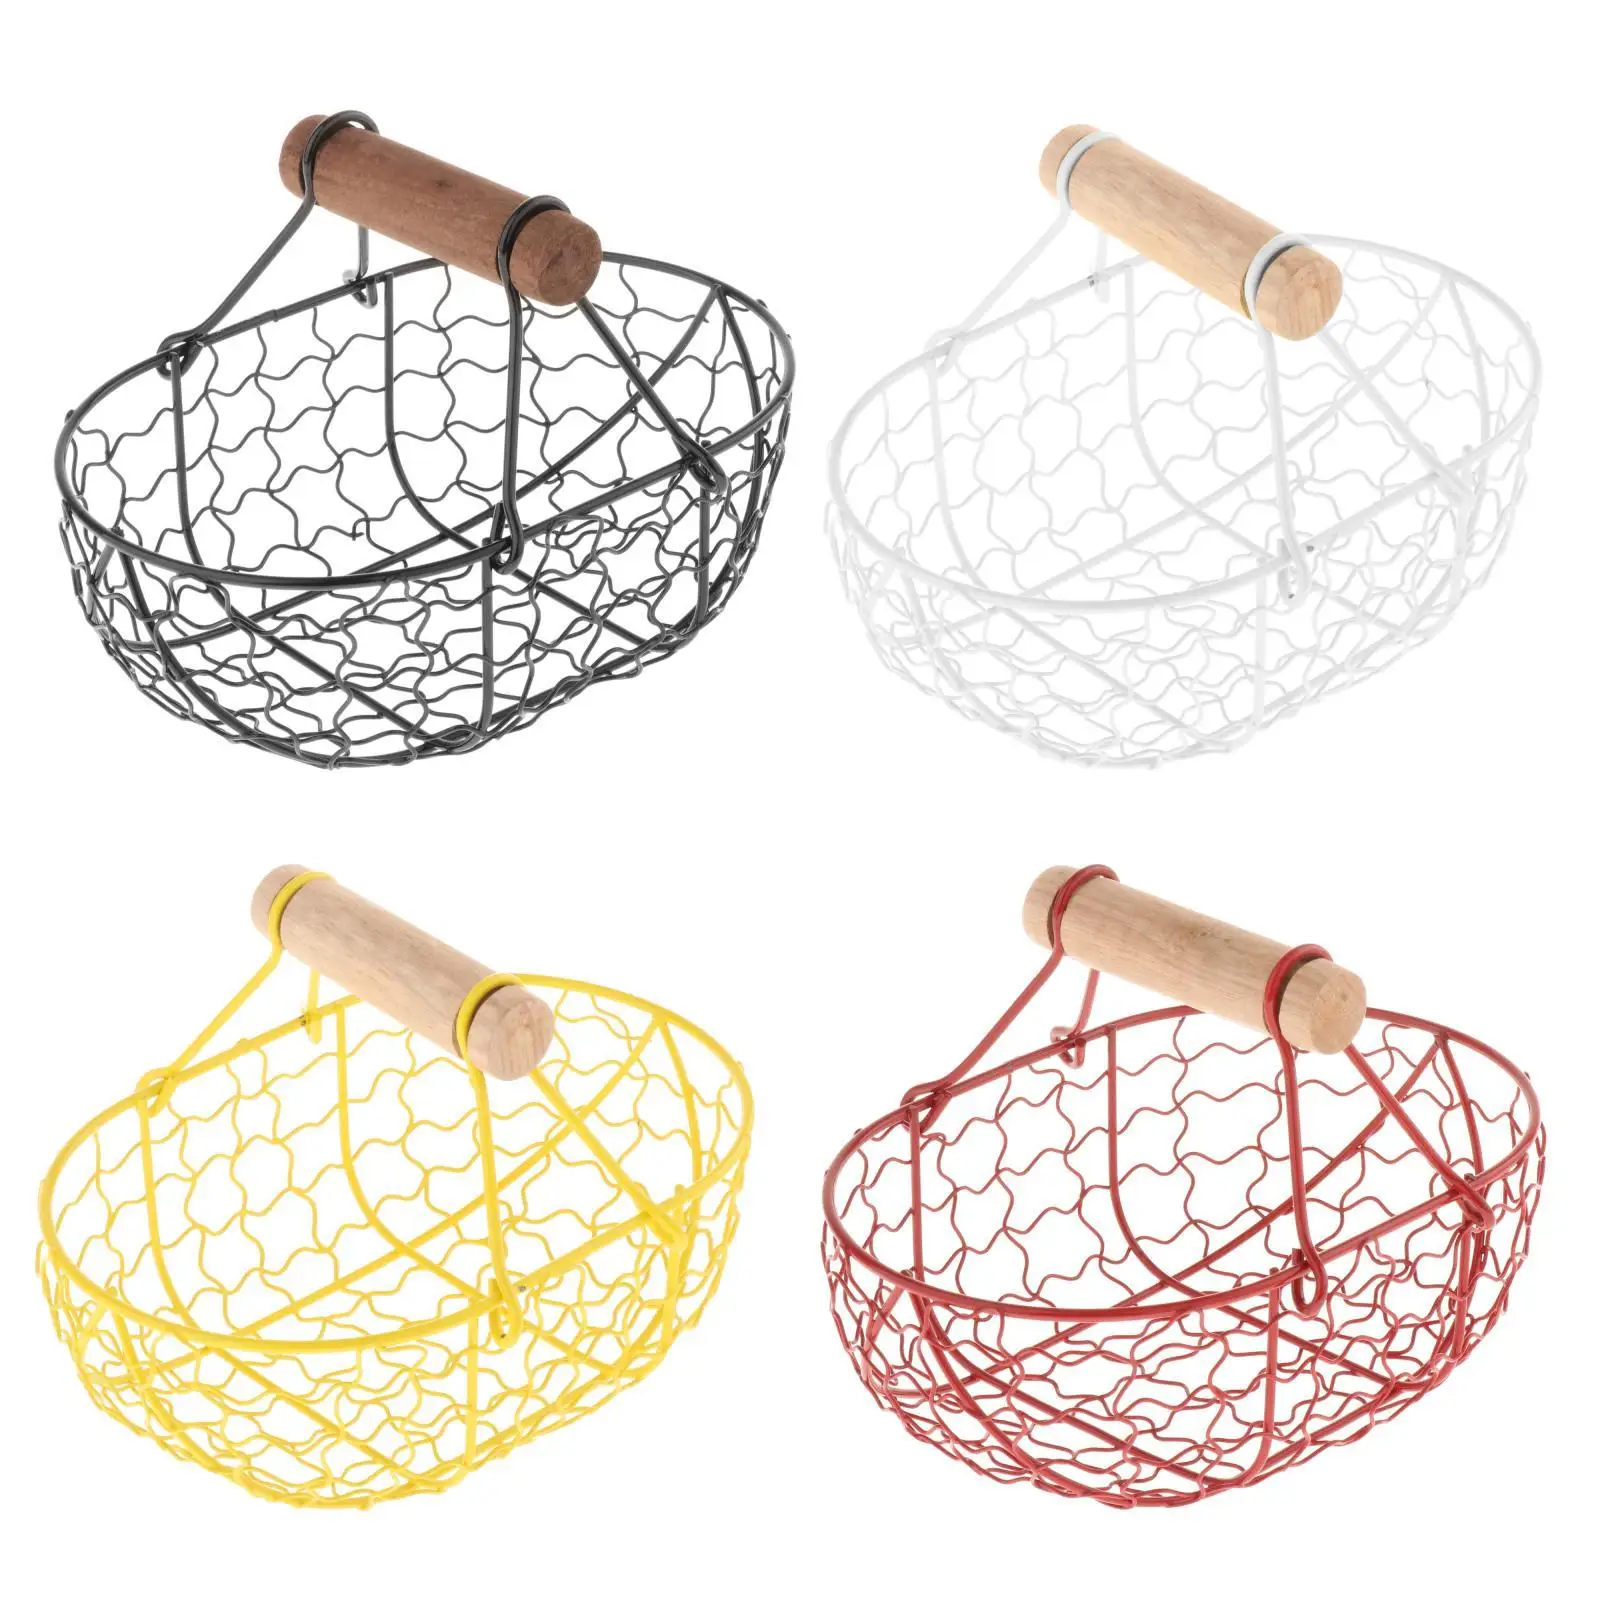 Kitchen Fruit Basket with Wooden Handle Decor Centerpieces Portable Holder Scene Layout Metal Mesh Bread Storage for Cabinet